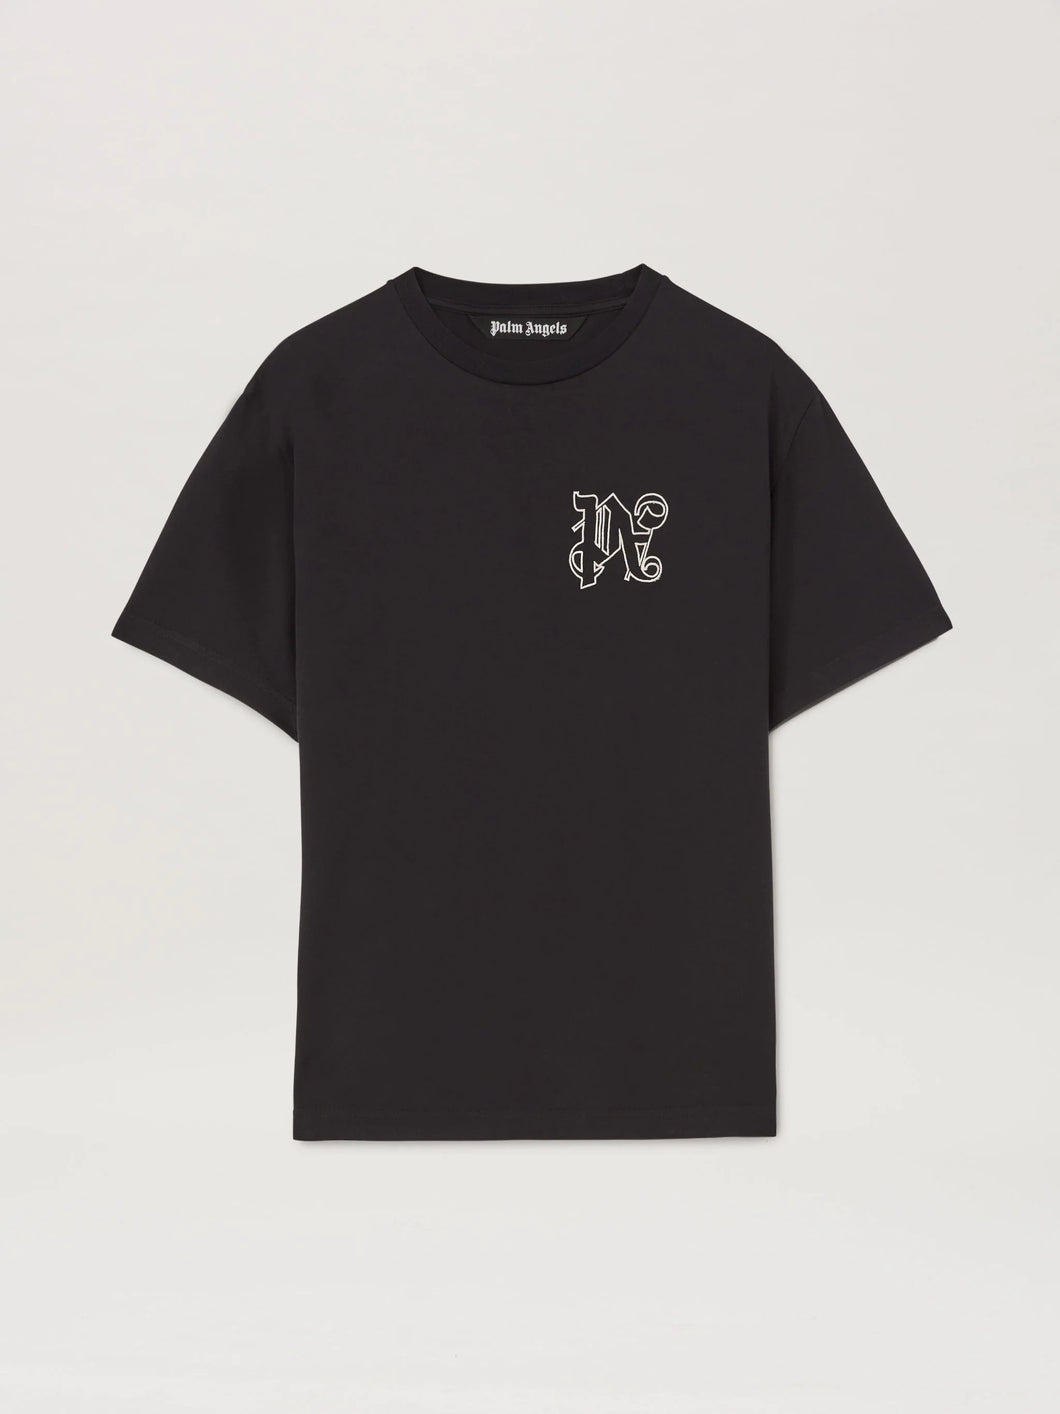 T-SHIRT CON MONOGRAM PALM ANGELS NEW COLLECTION FW 23/24